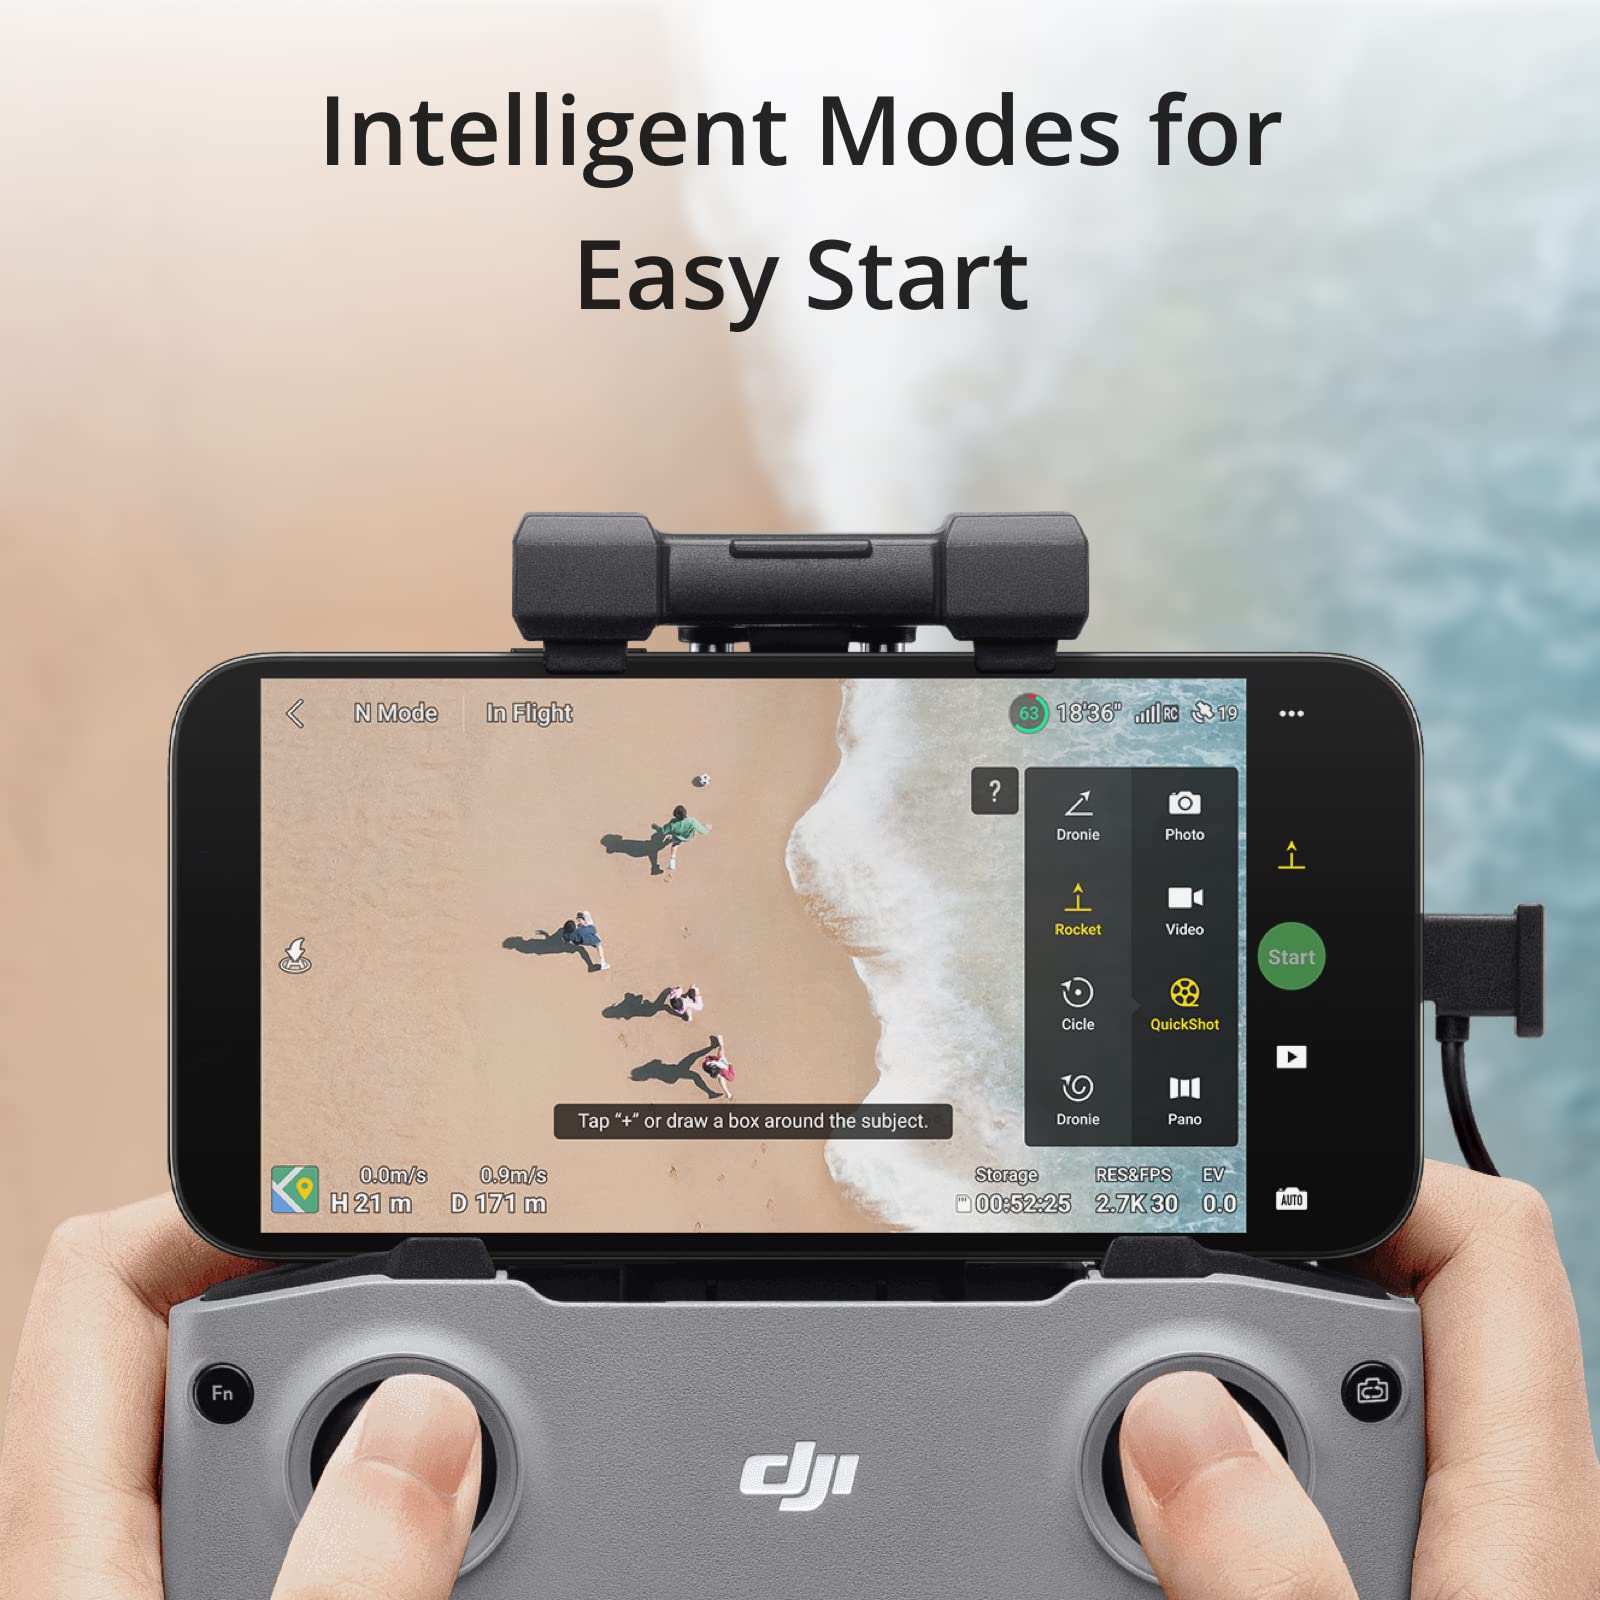 DJI Mini 2 SE, Lightweight and Foldable Mini Drone with QHD Video, 10km Video Transmission, 31-min Flight Time, Under 249 g, Return to Home, Automatic Pro Shots, Drone with Camera for Beginners